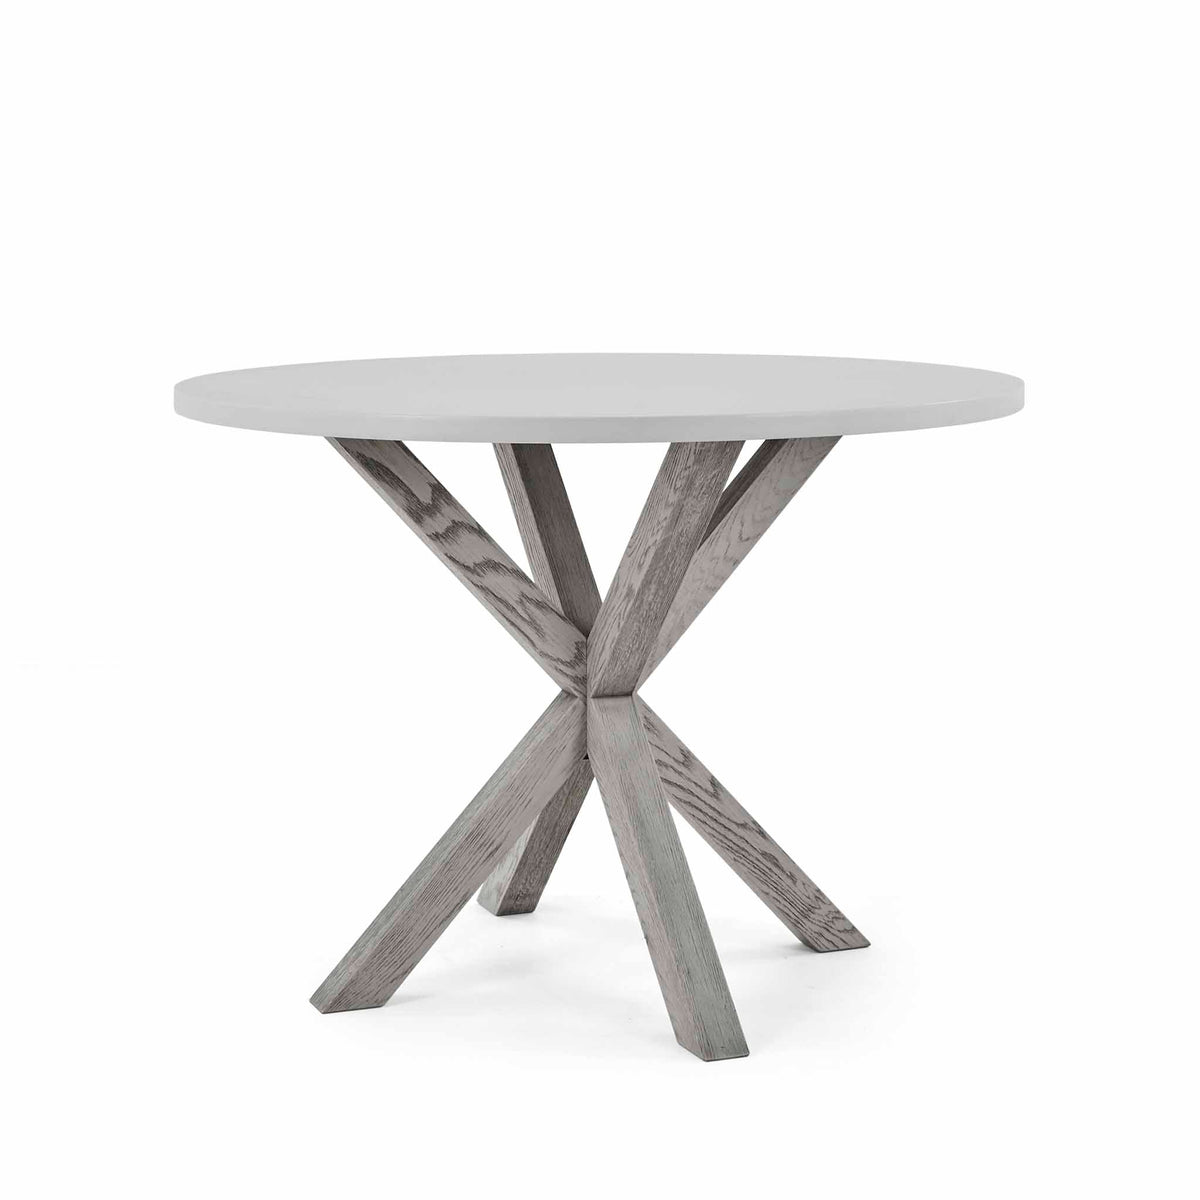 Epsom 110cm Round Dining Table with concrete effect top